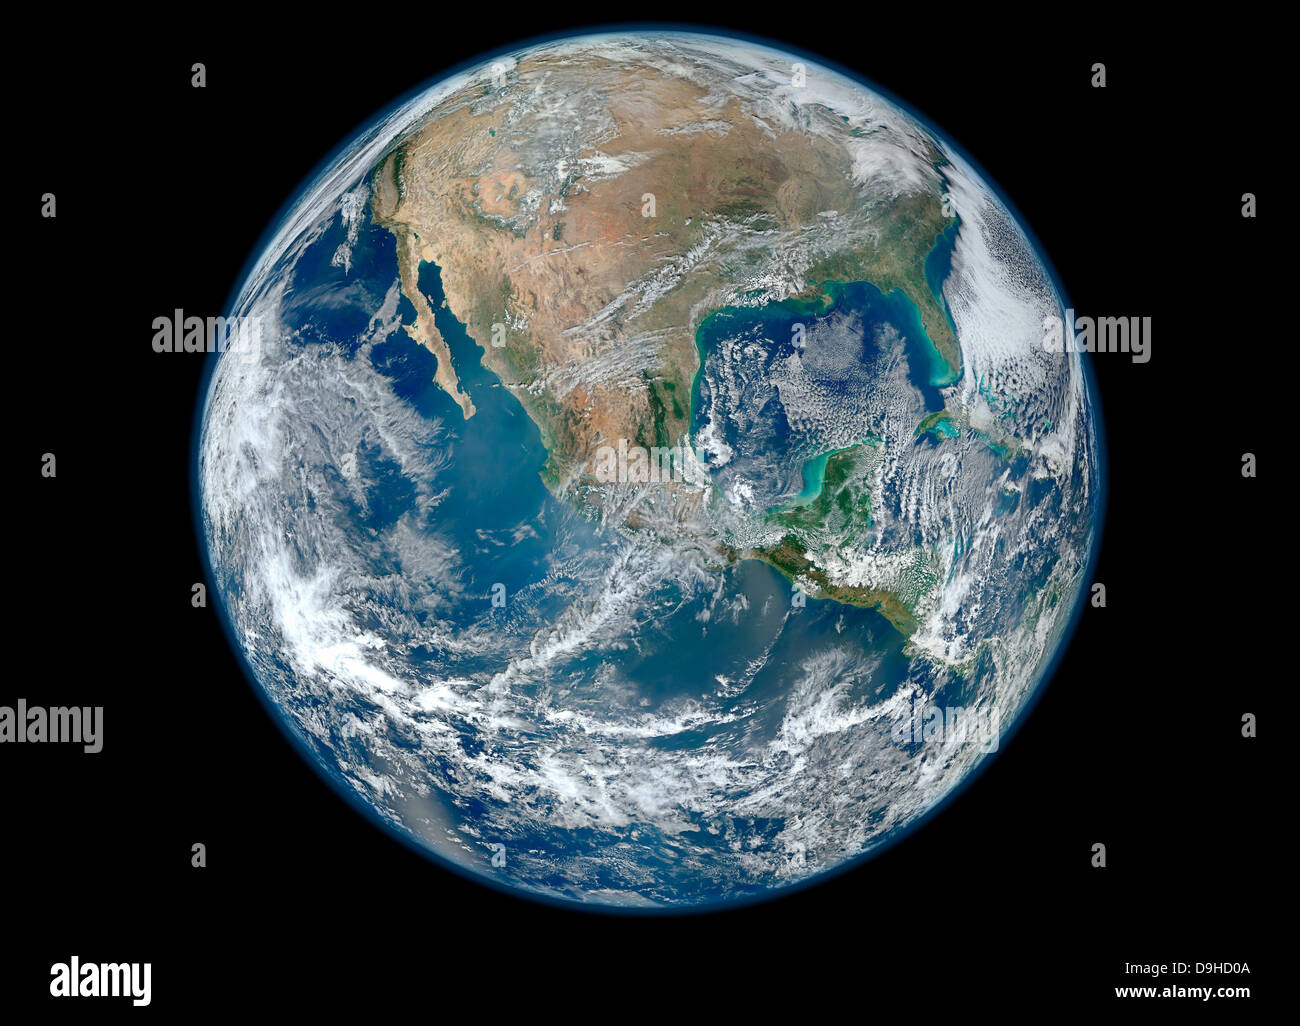 January 4, 2012 - A Blue Marble image of Earth showing North America. Stock Photo